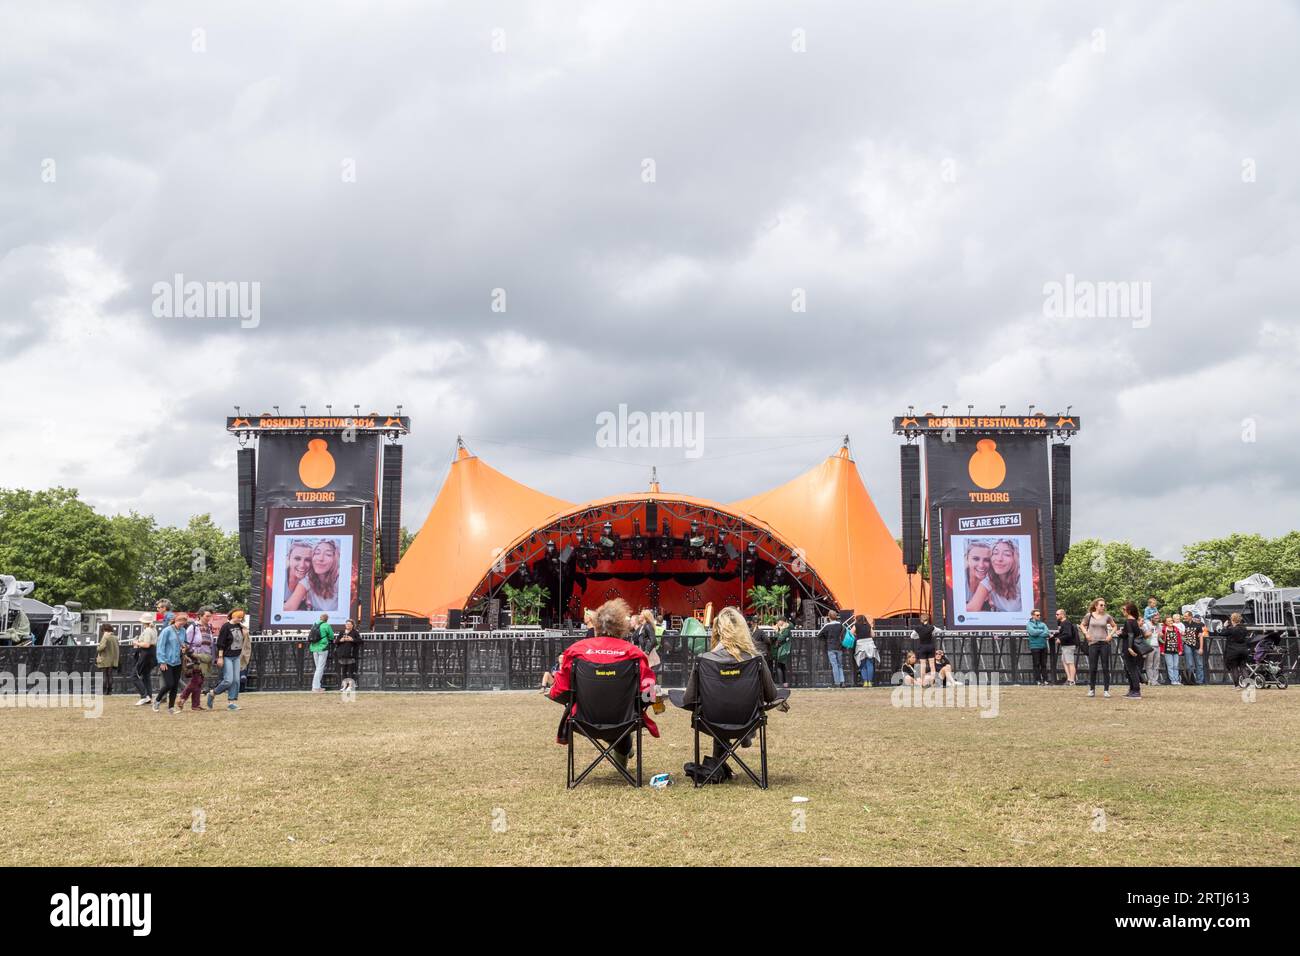 Roskilde, Denmark, July 1, 2016: Two people sitting in front of the orange stage at Roskilde Festival 2016 Stock Photo